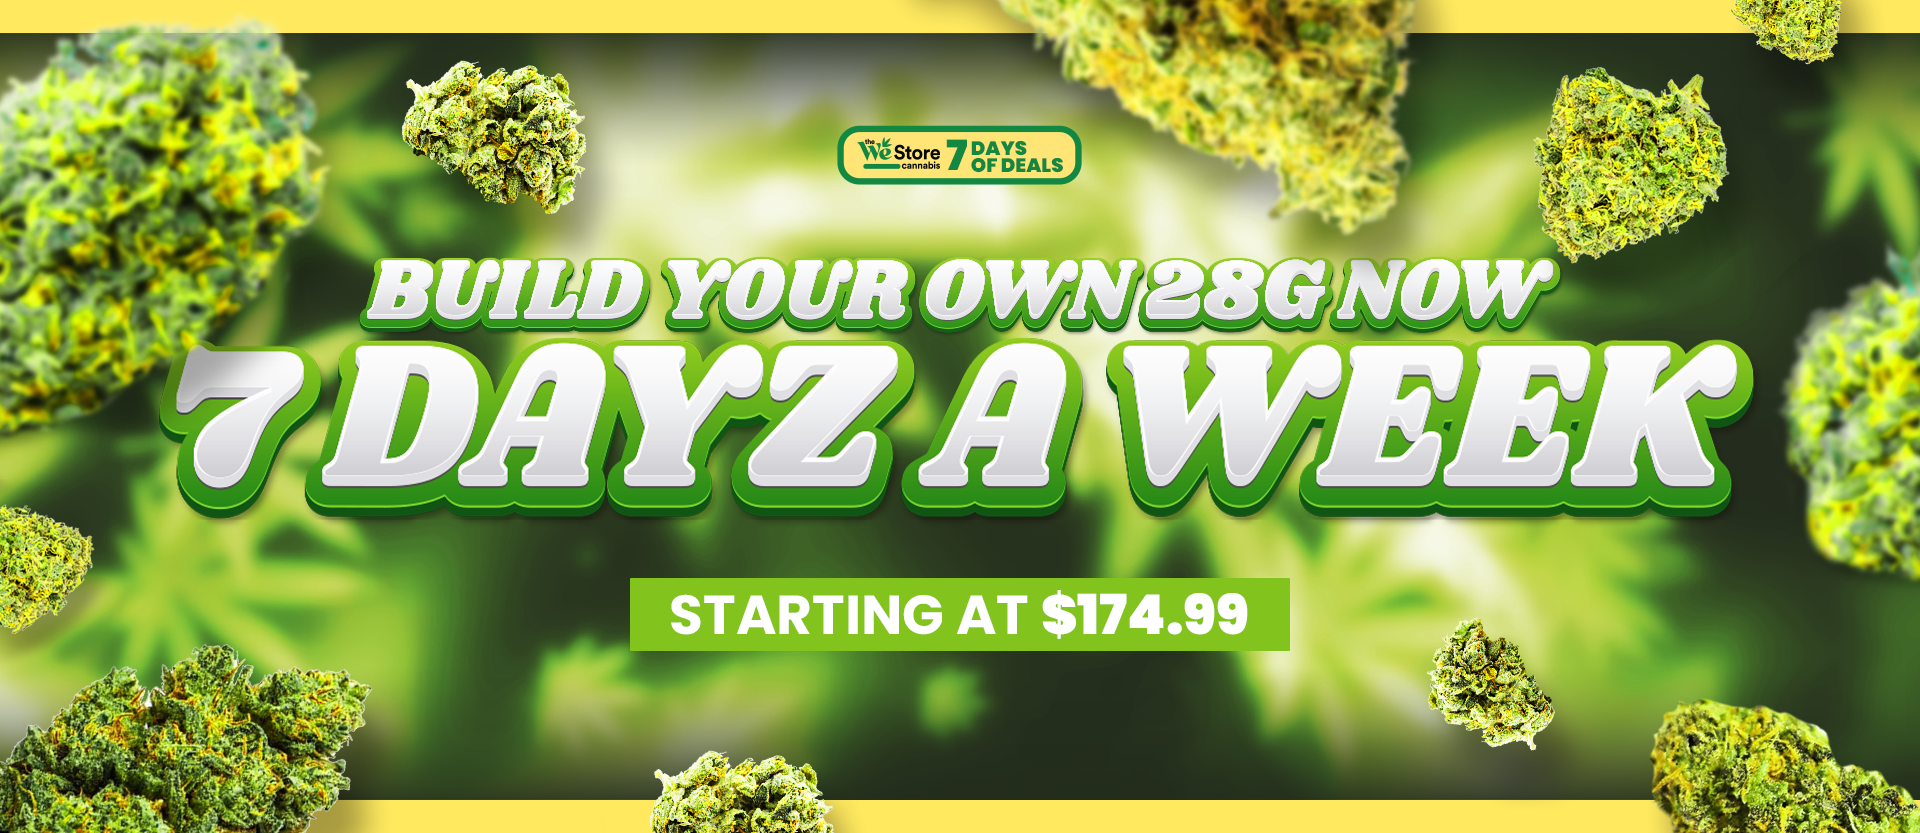 Build your own 28g now 7 Dayz a Week